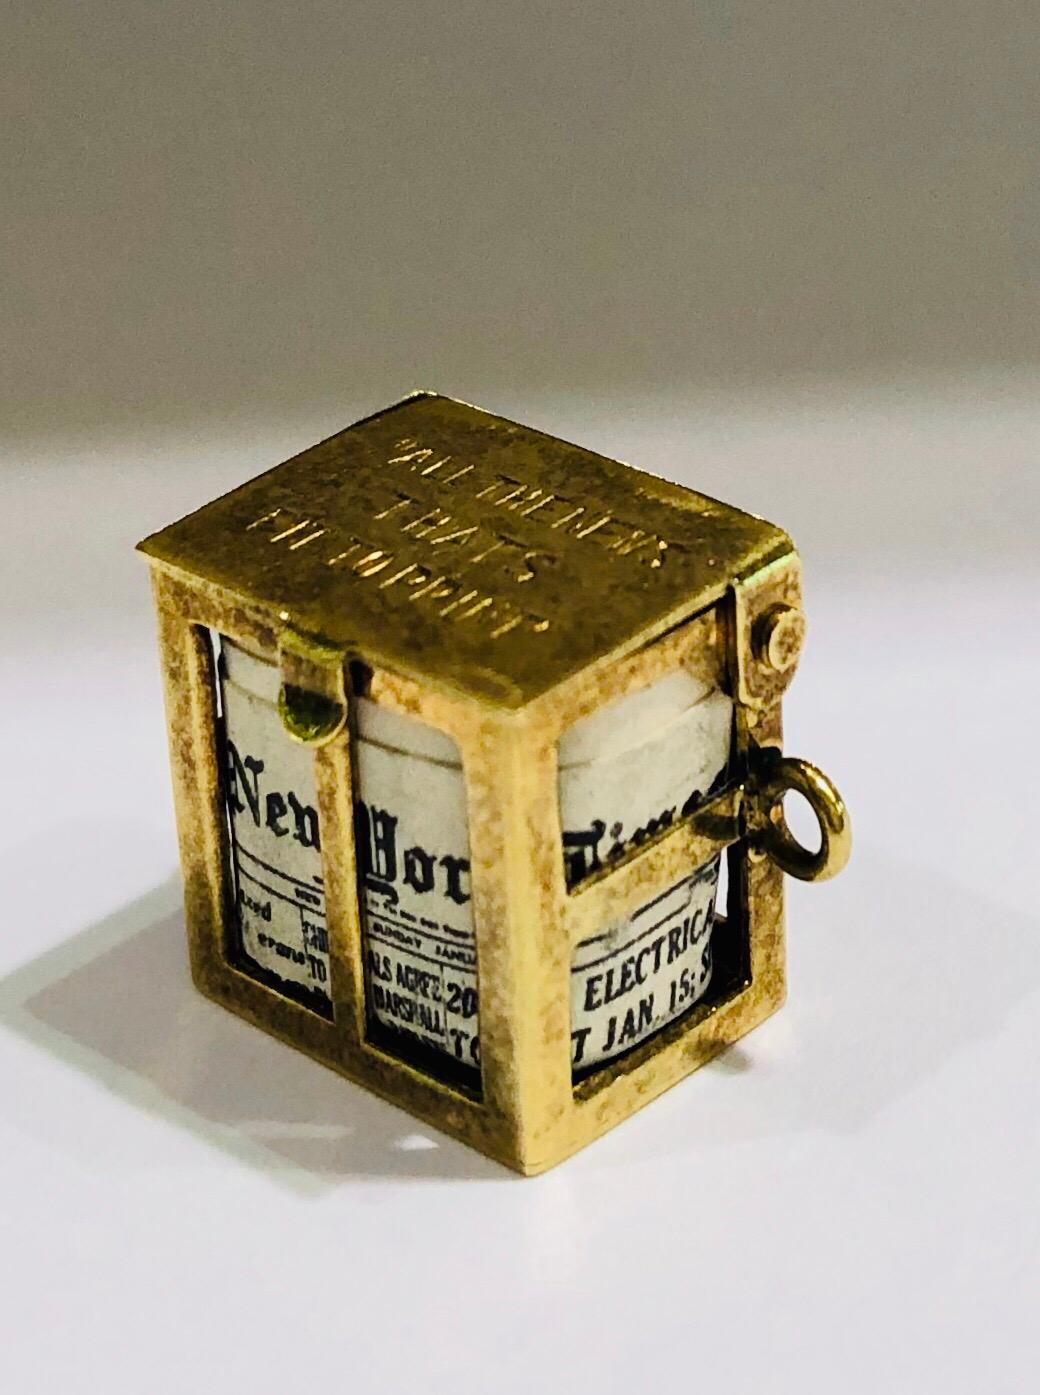 This amazing New York Times charm is about as rare as they come. The top of the charm is engraved: 